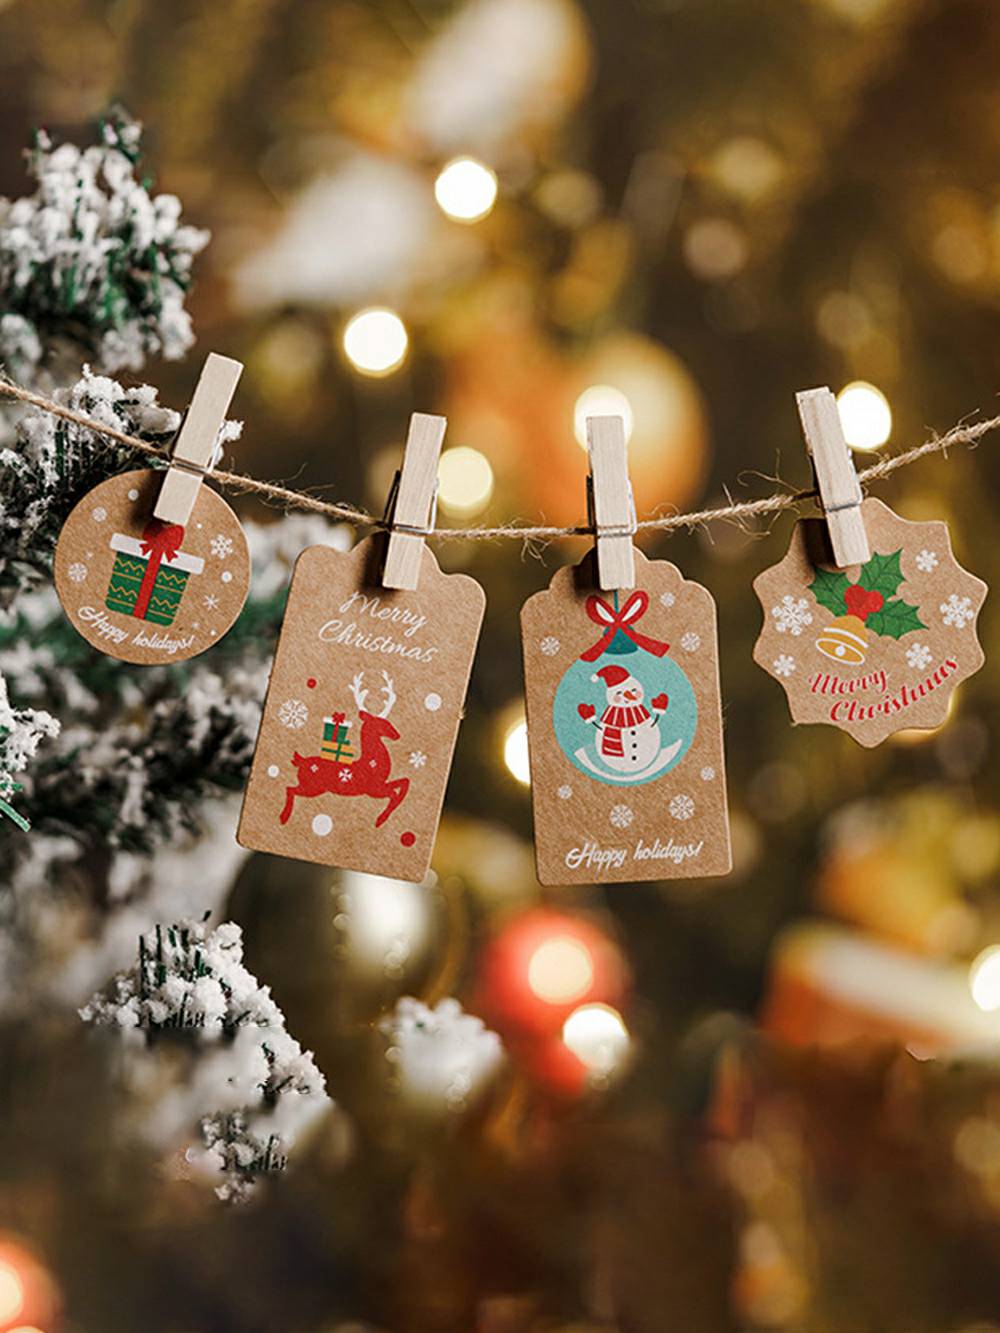 Christmas Decoration Tags - Holiday Gifts Card